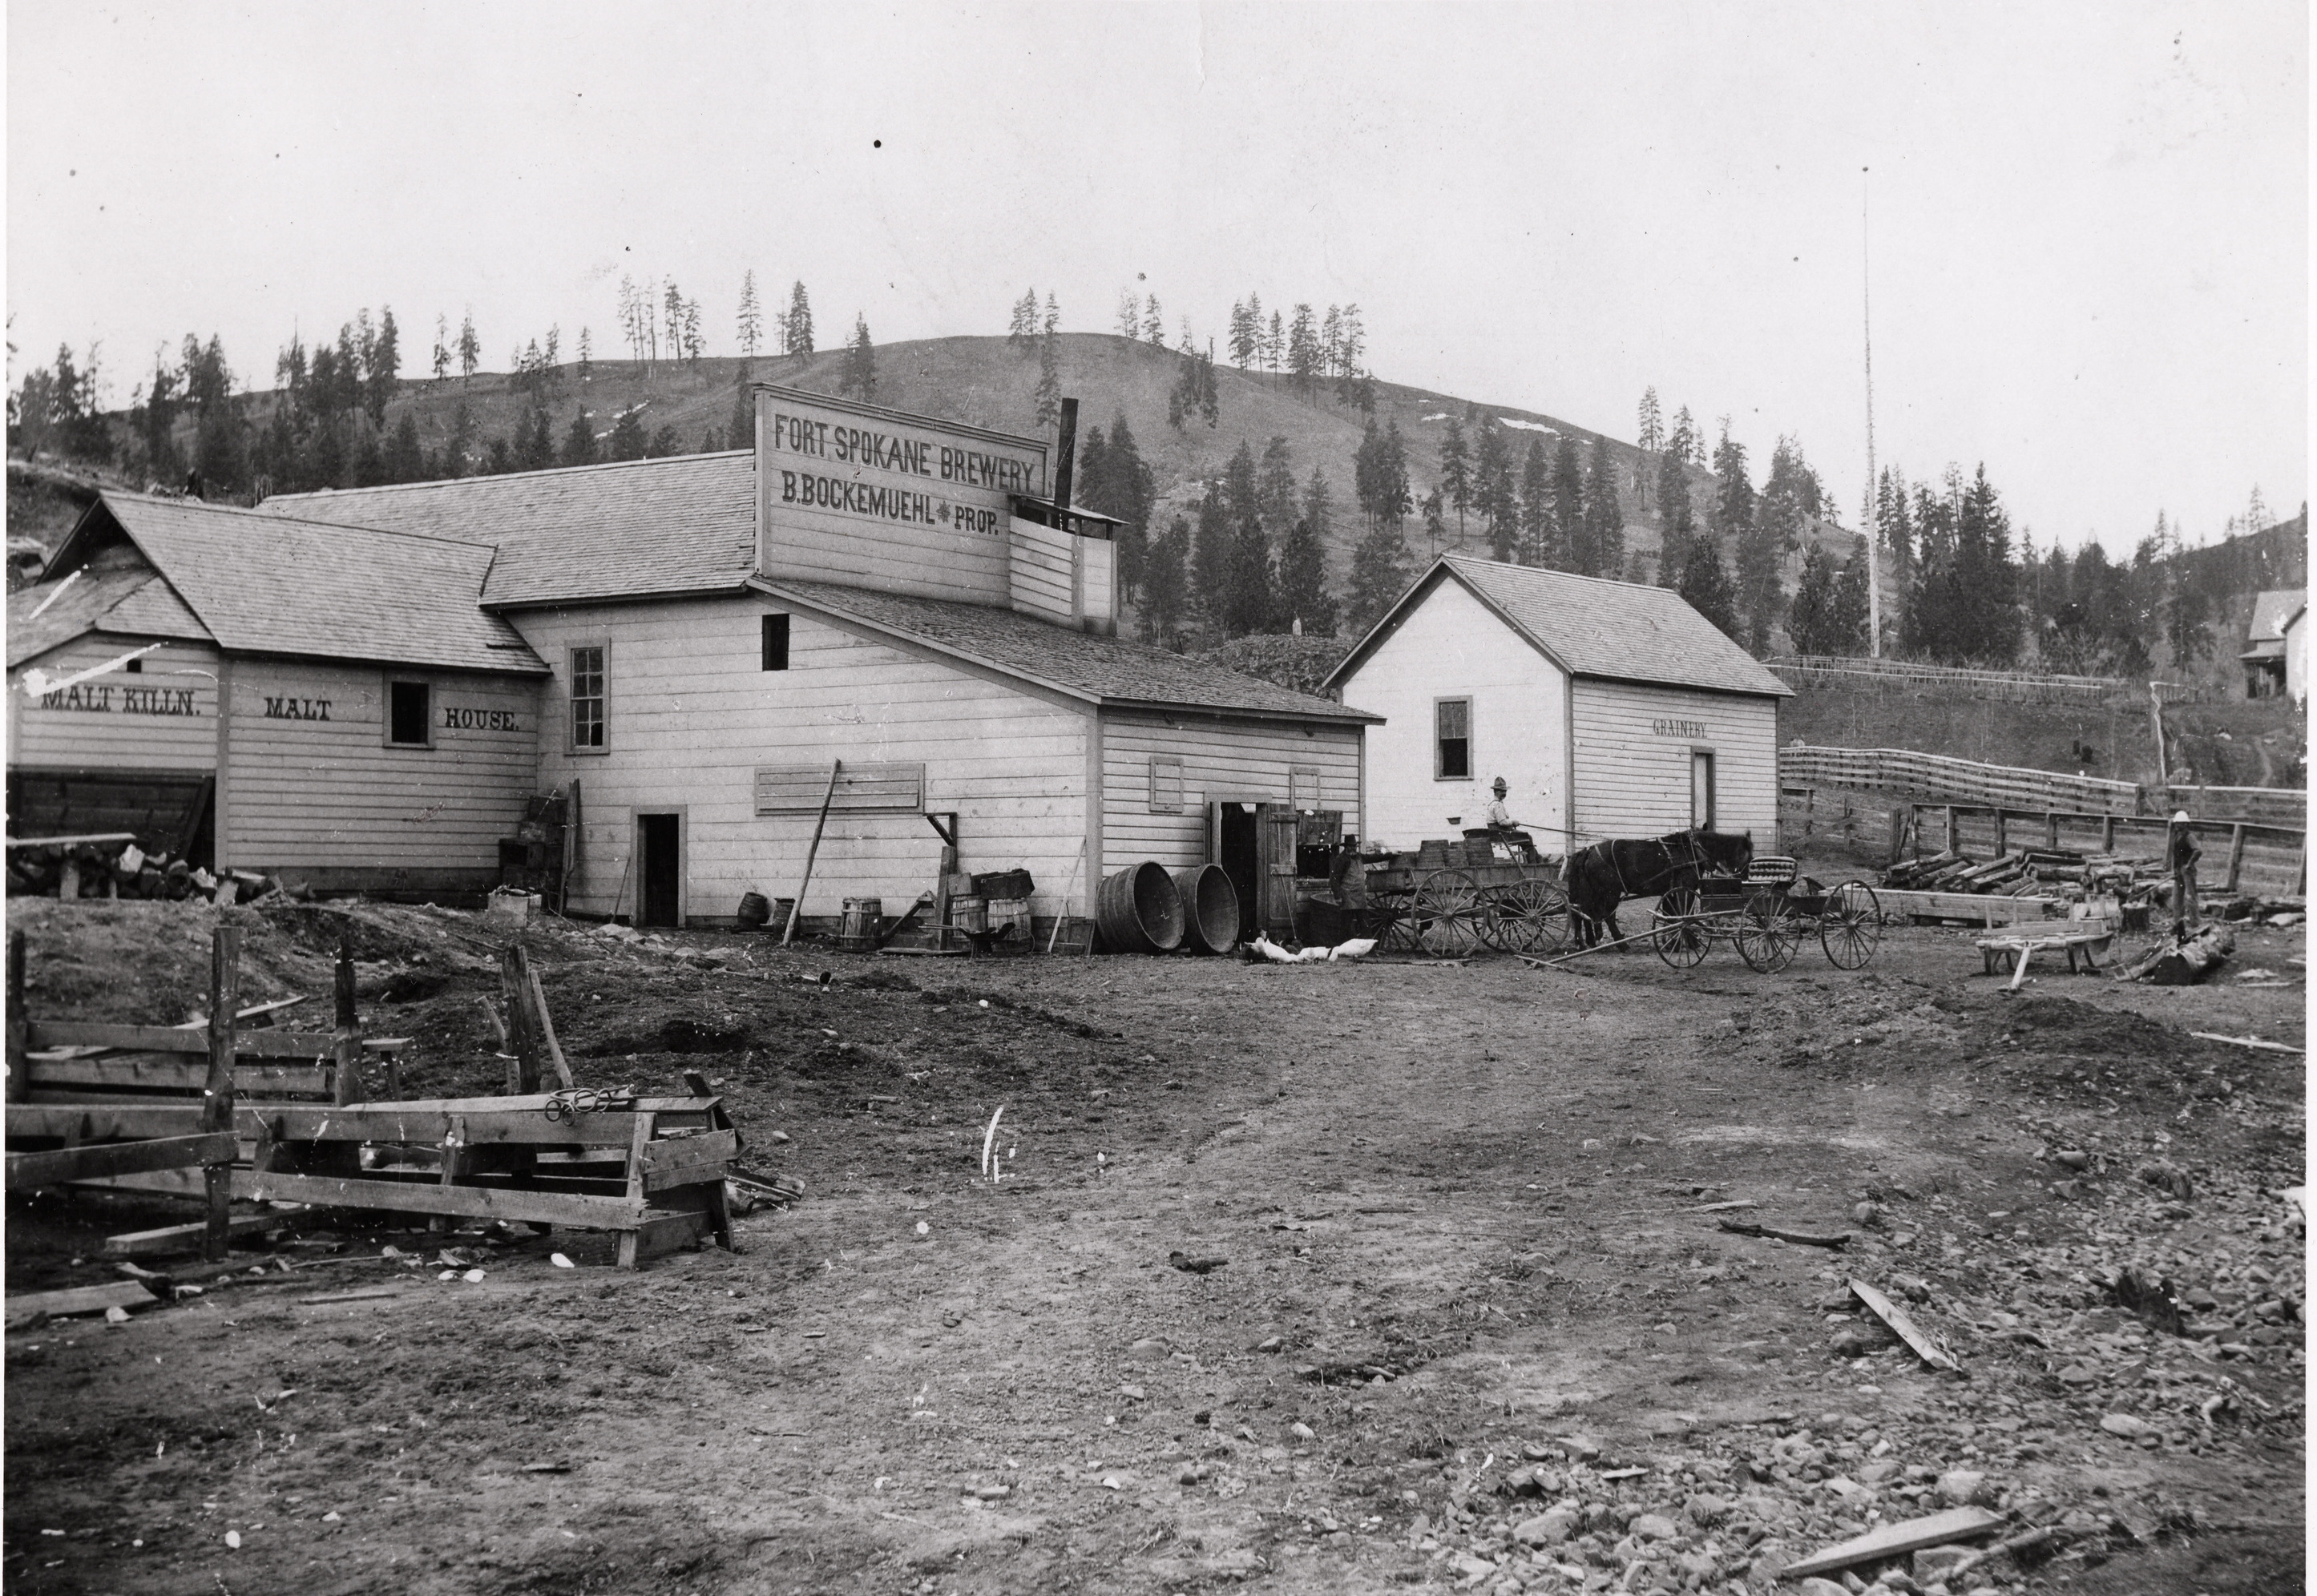 Black and white photograph of plain wooden building with a small building next to it and horses and wagons in front